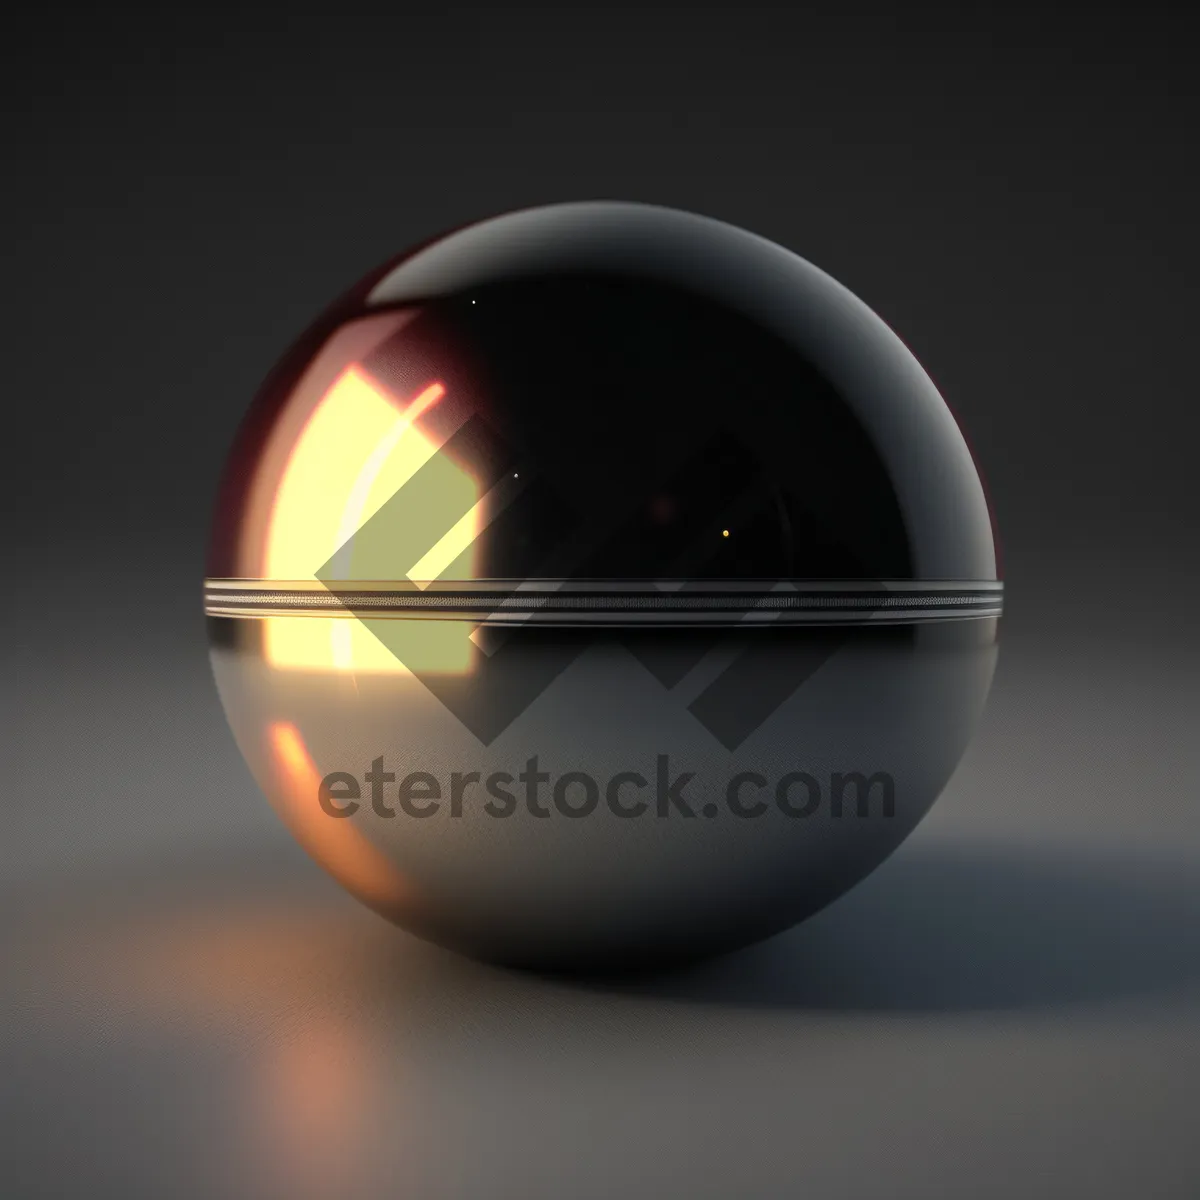 Picture of Shiny Glass Satellite Sphere Icon with Graphic Curve